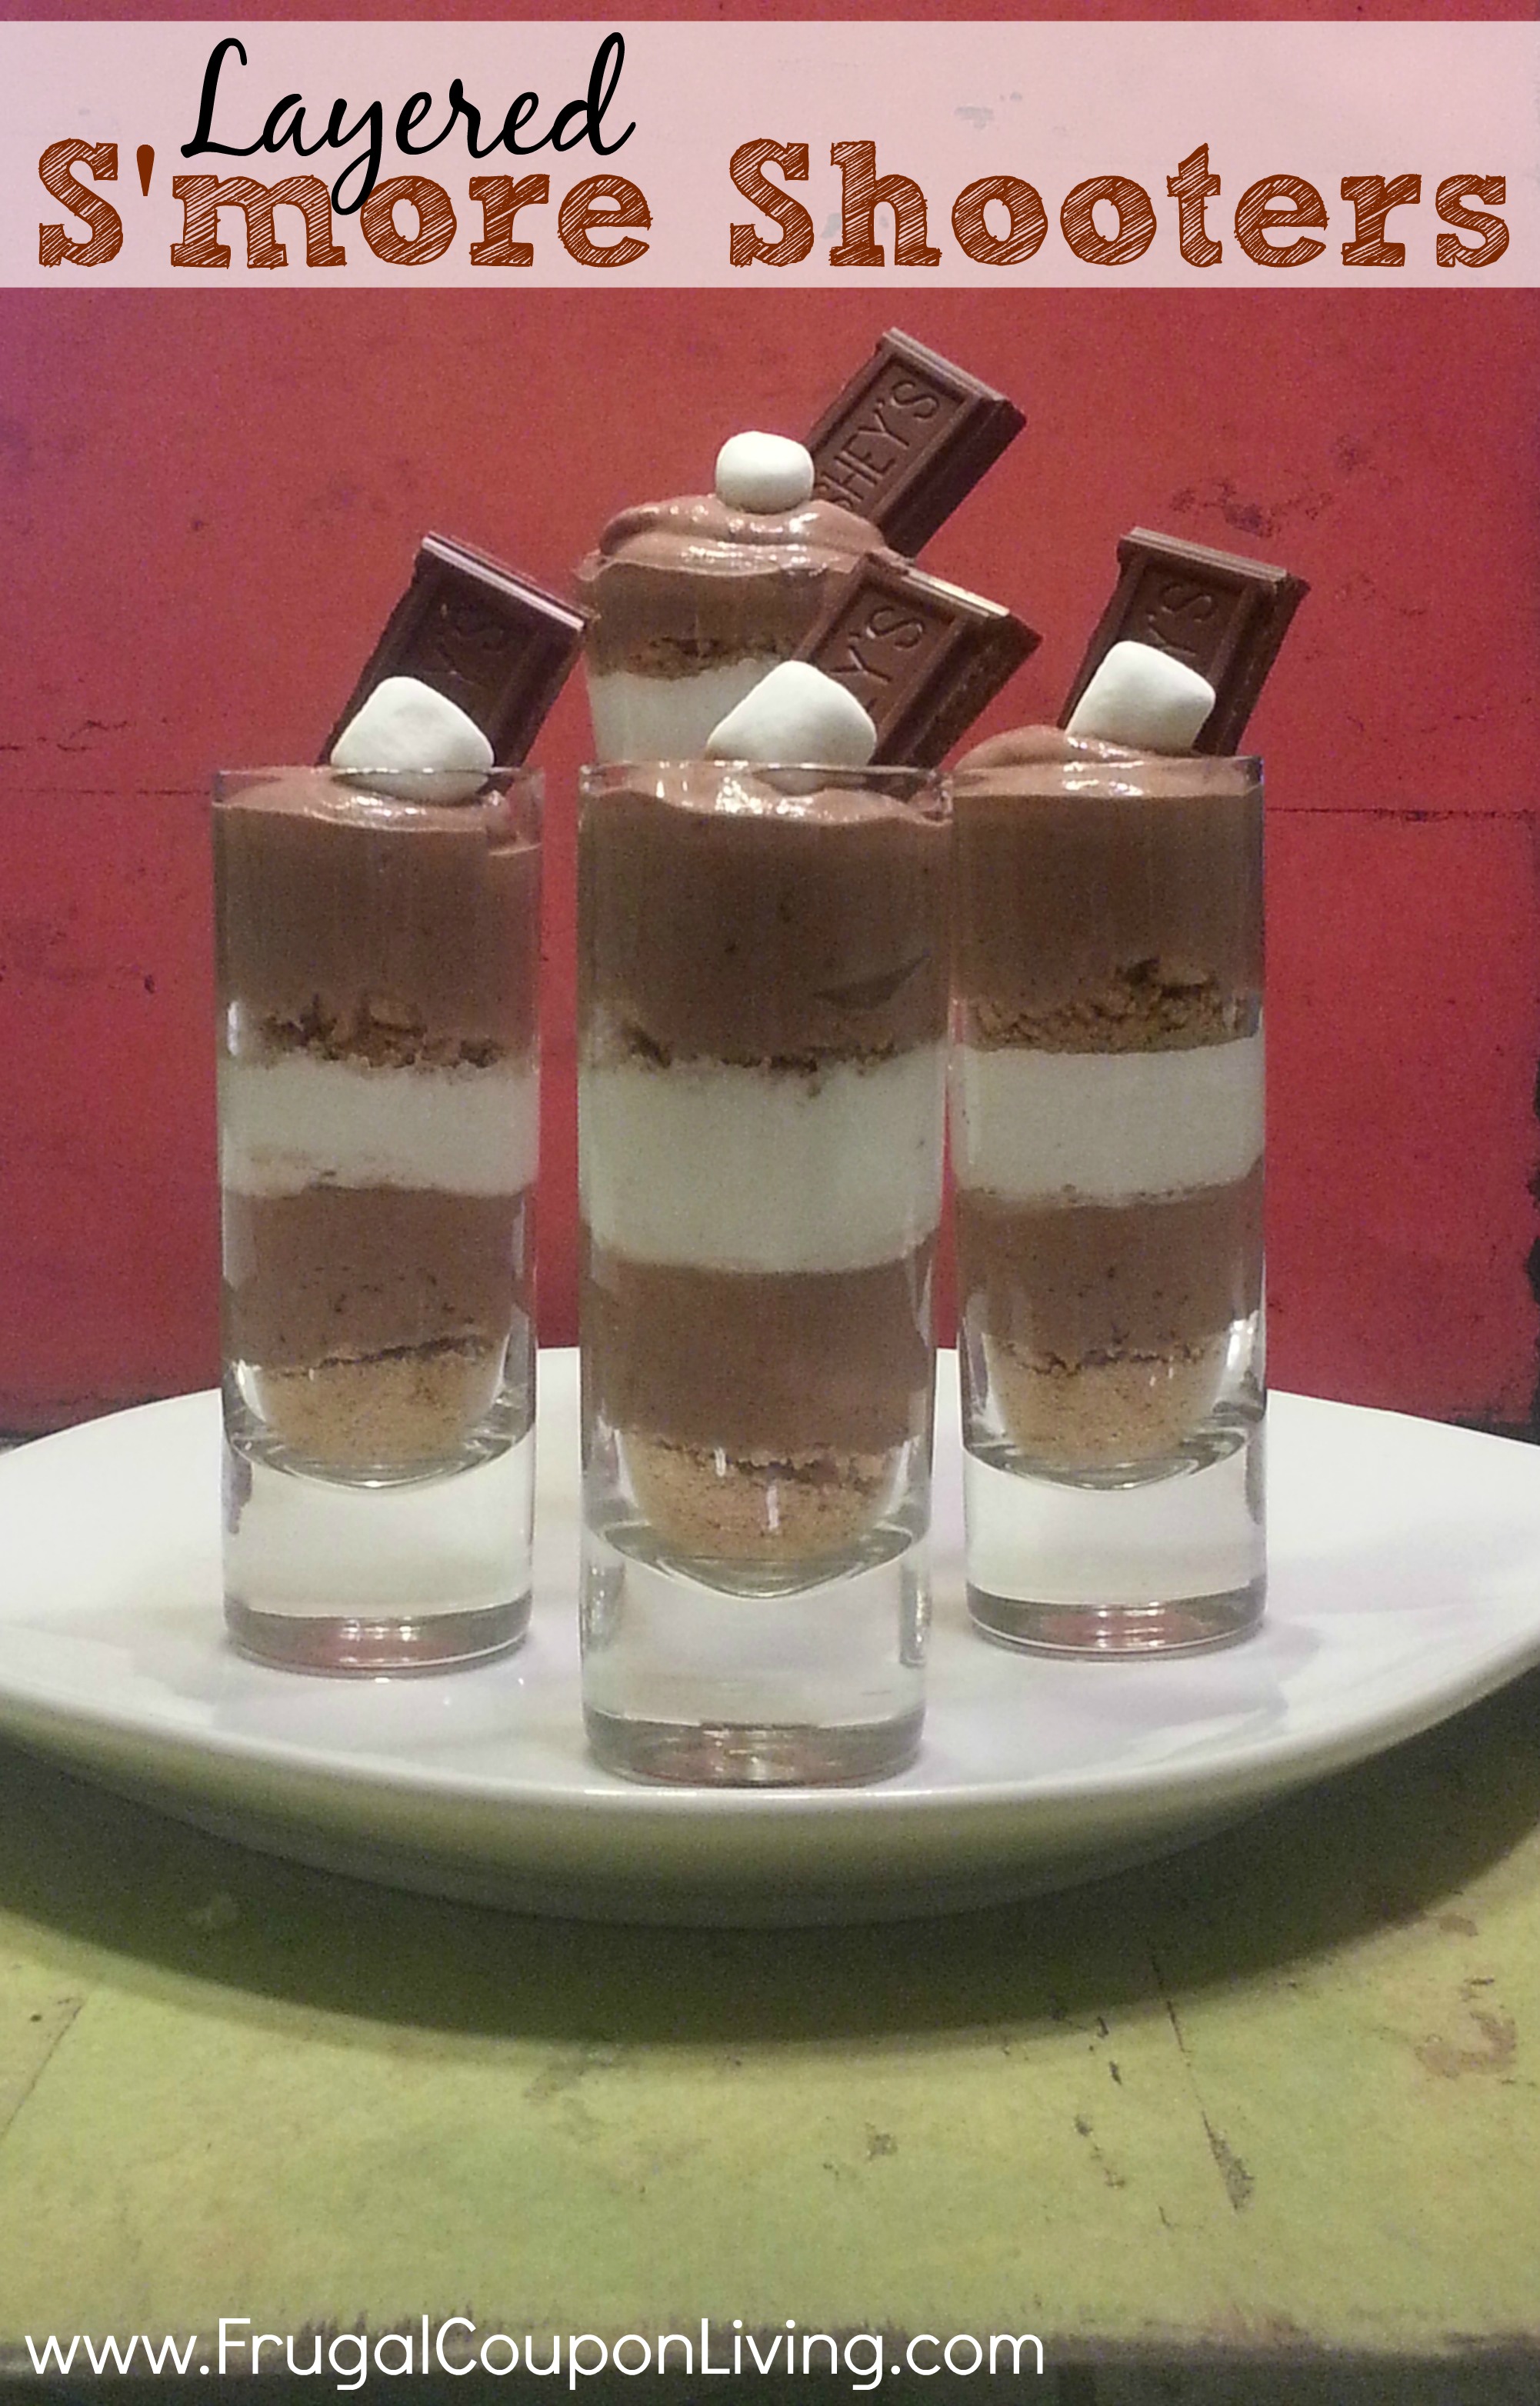 Layered S’more Shooters Dessert Recipe